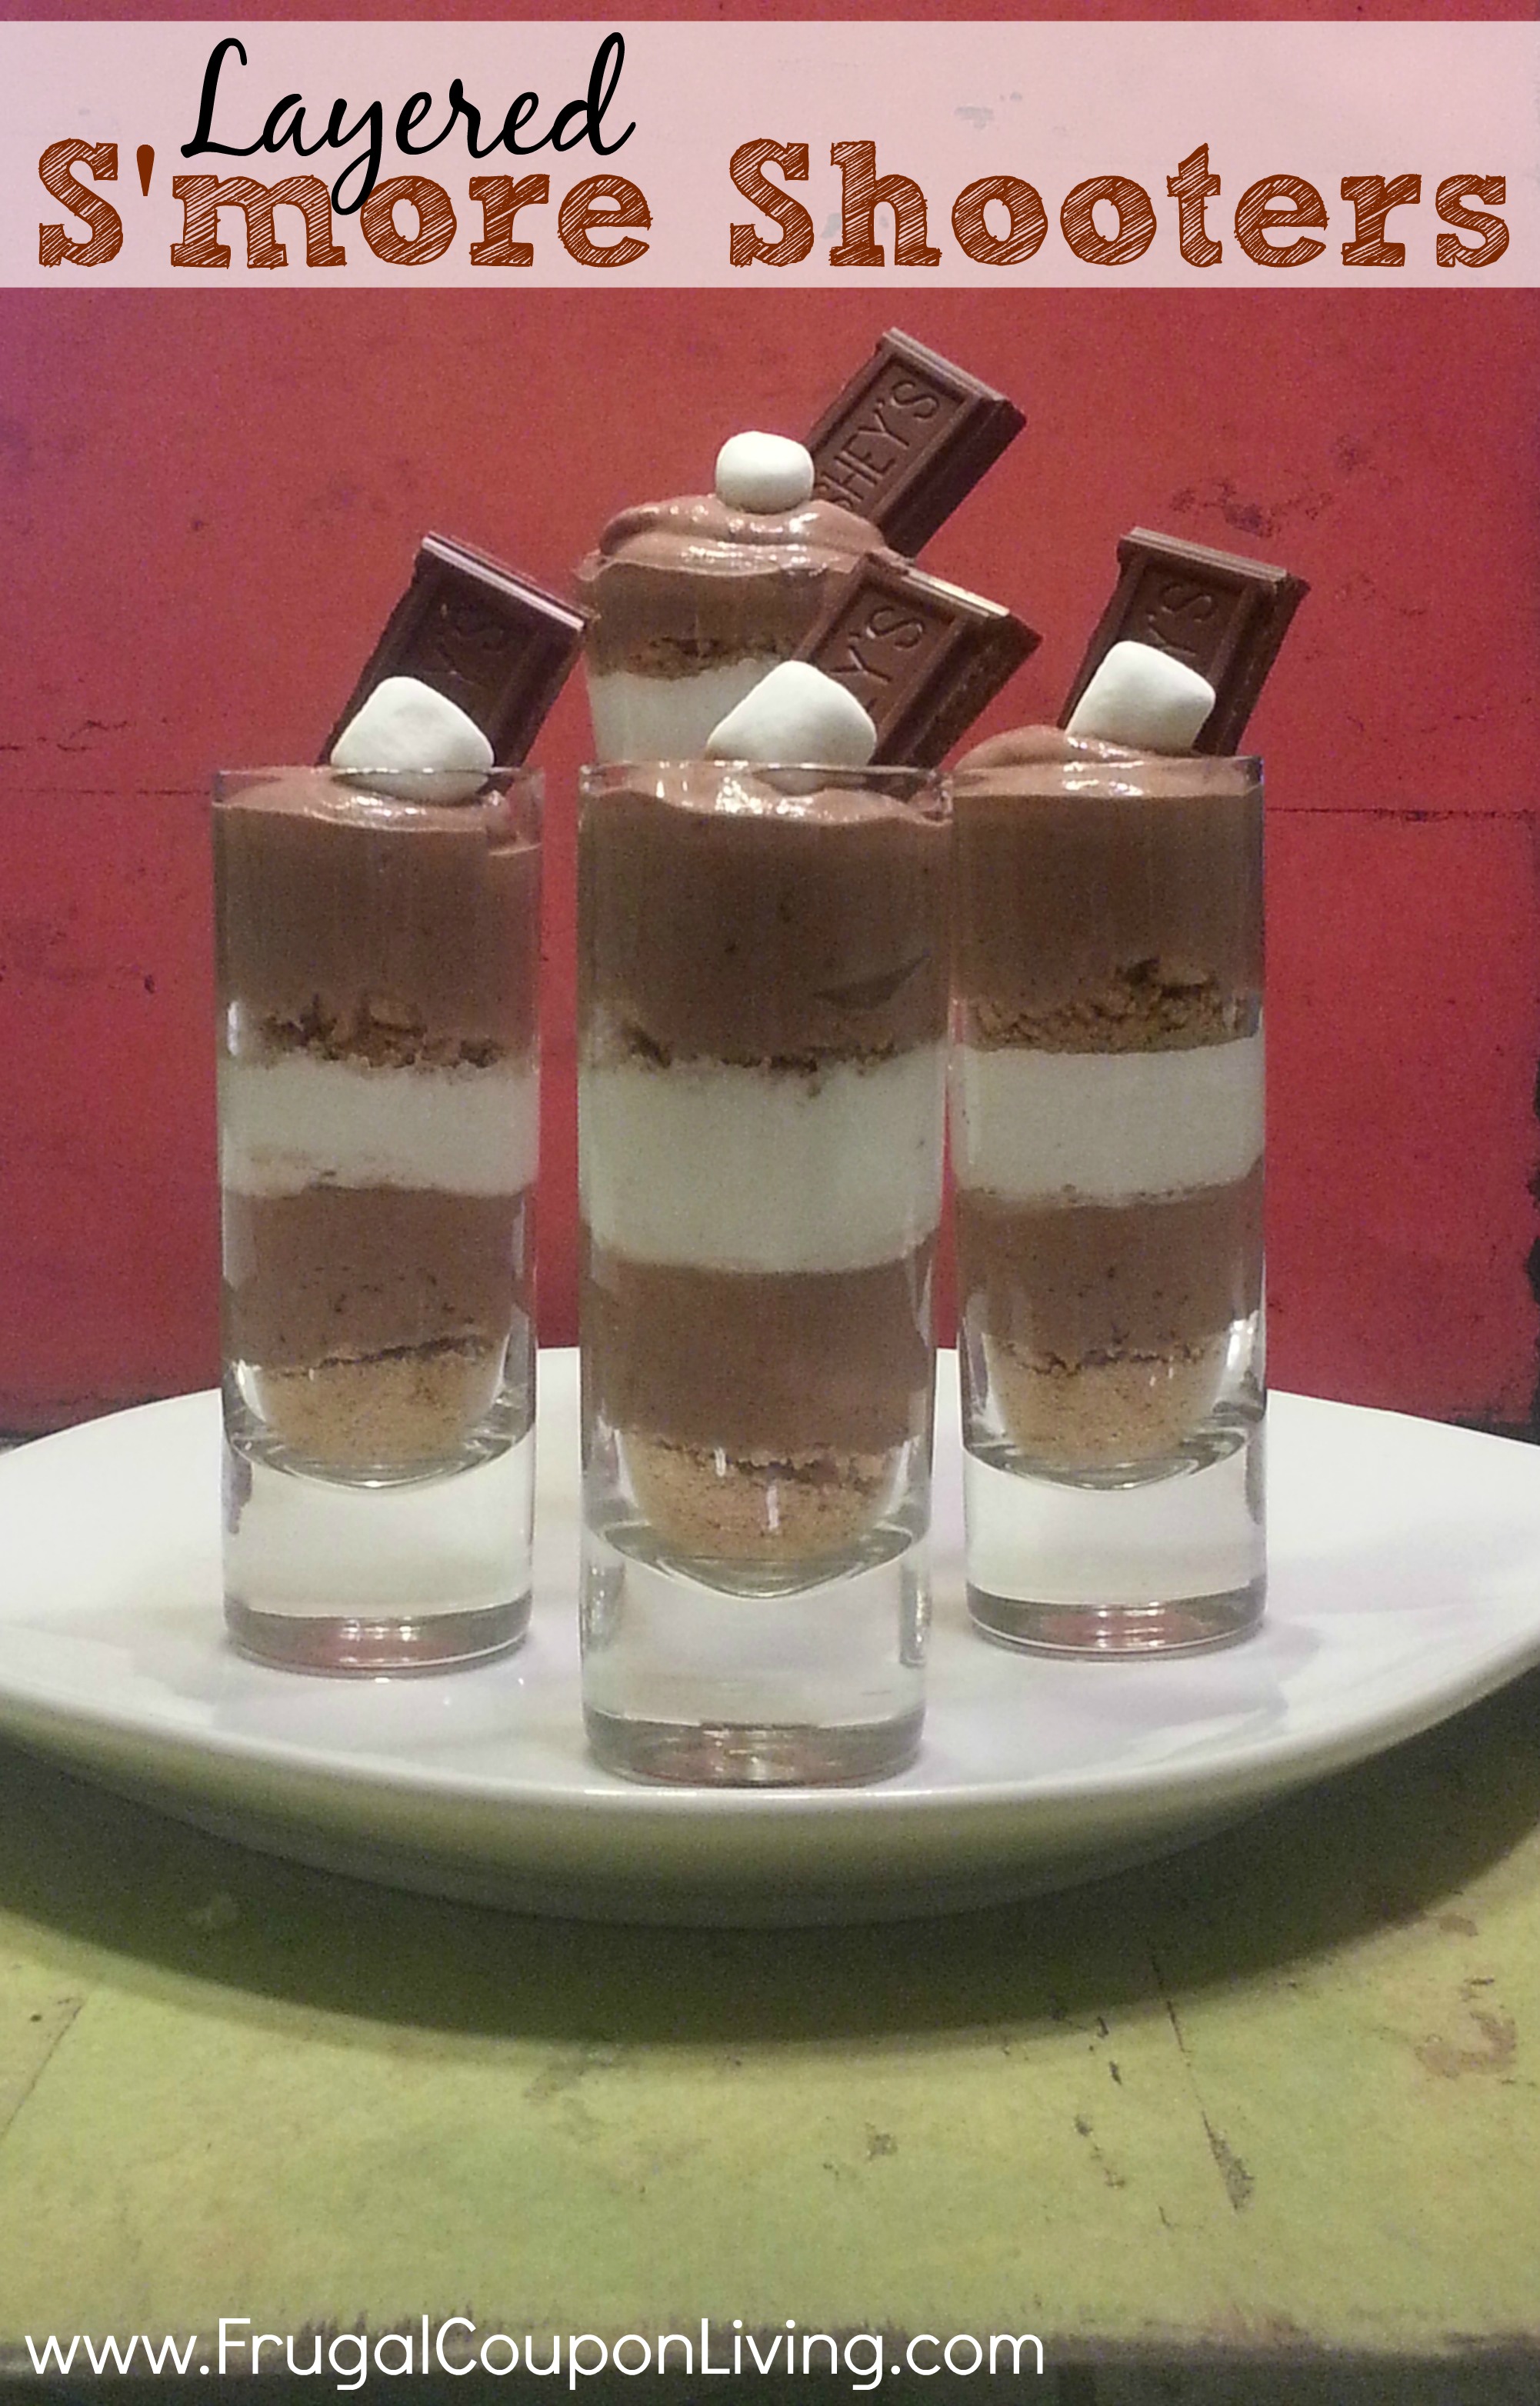 Layered S’more Shooters Dessert Recipe